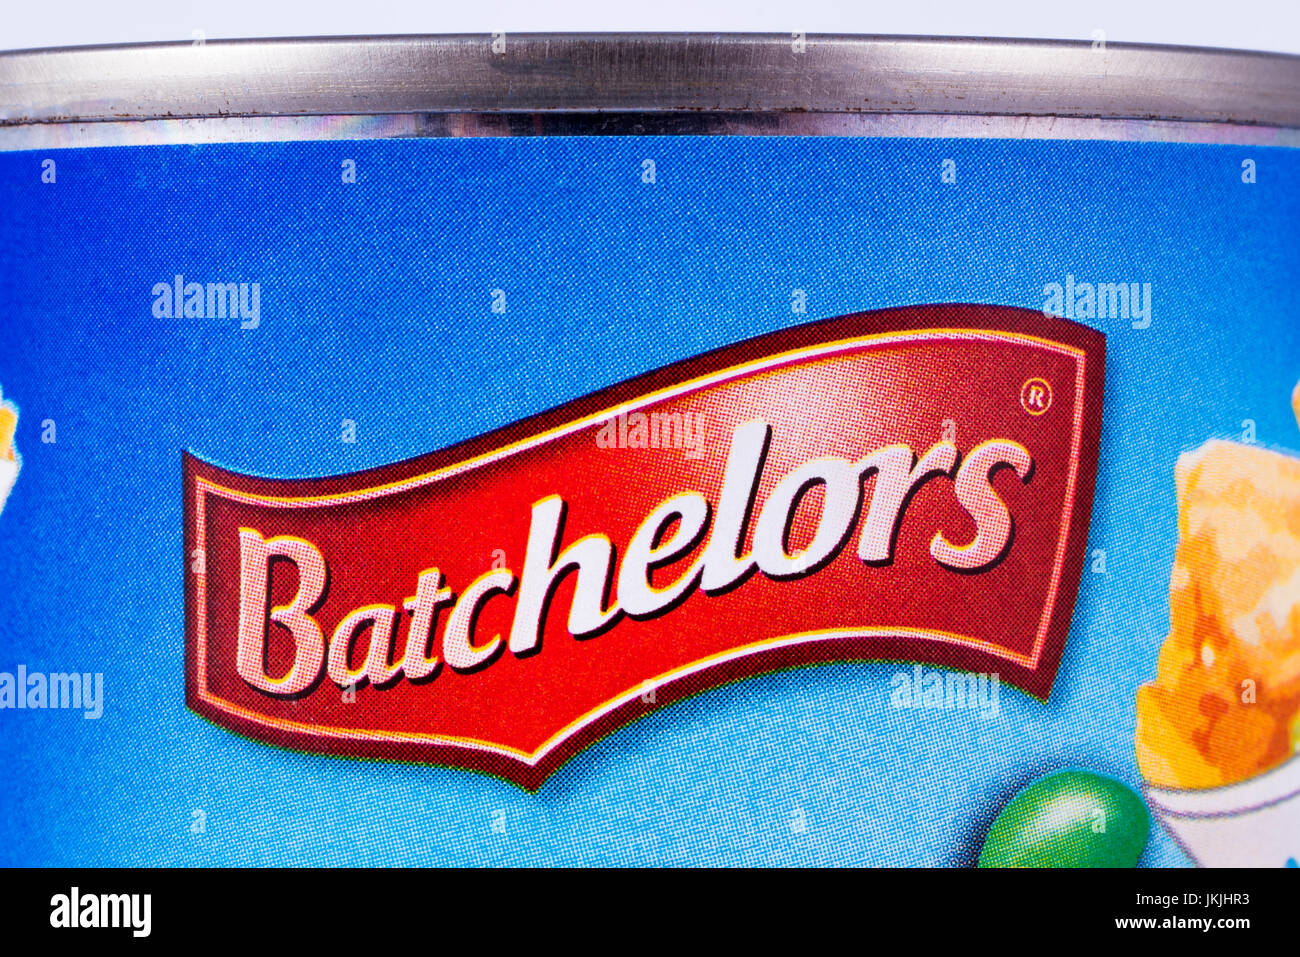 LONDON, UK - JULY 7TH 2017: A close-up of the Batchelors logo on one of their tinned food products, on 7th July 2017. Stock Photo